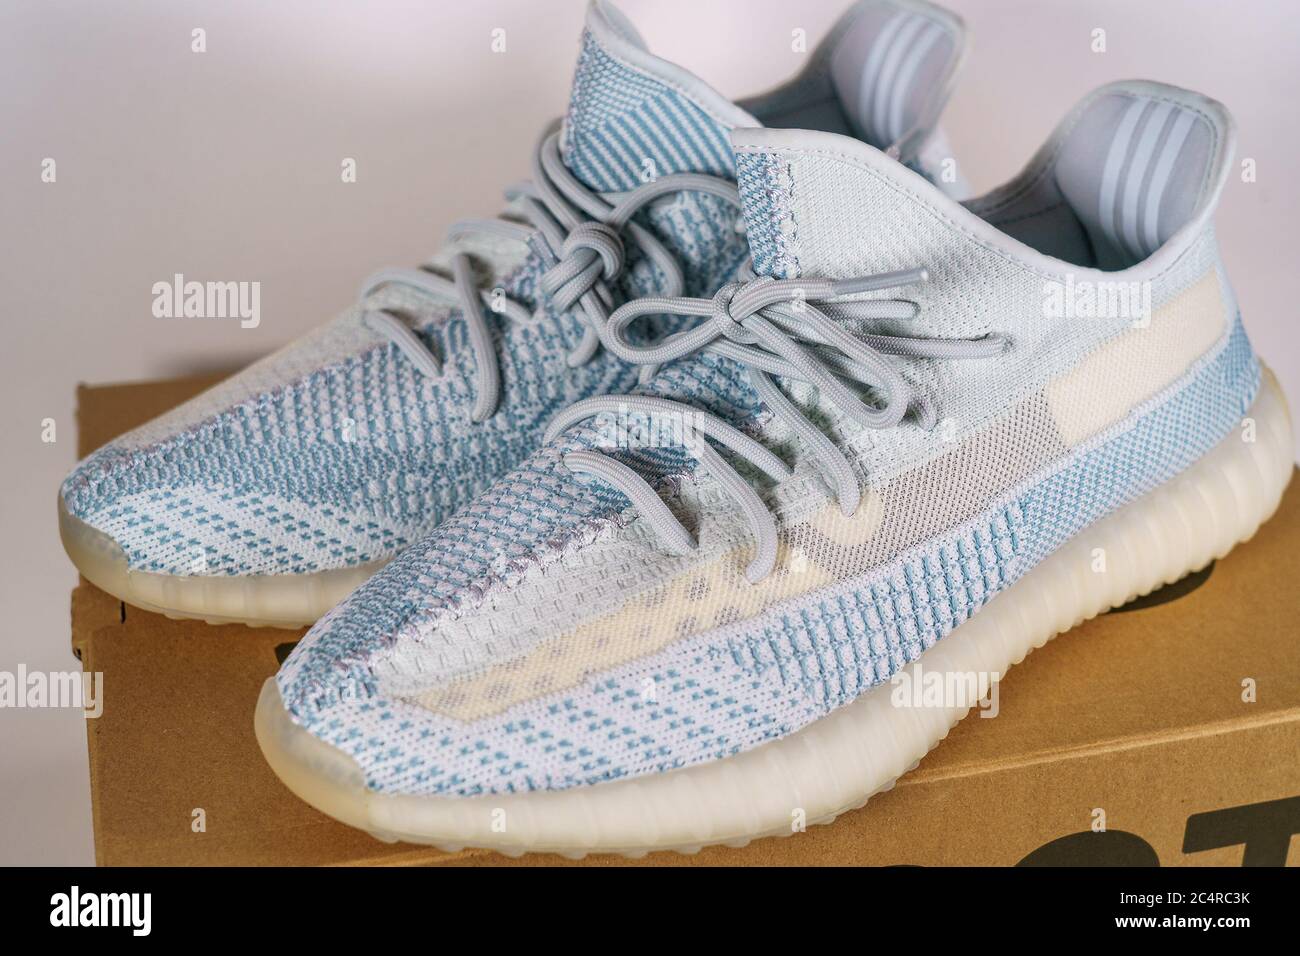 Moscow, Russia - June 2020 : Adidas Yeezy Boost 350 V2 Cloud White - Famous Limited Collection Fashion Sneakers by Kanye West and Adidas Collaboration, Trendy Sport Shoes. Stock Photo